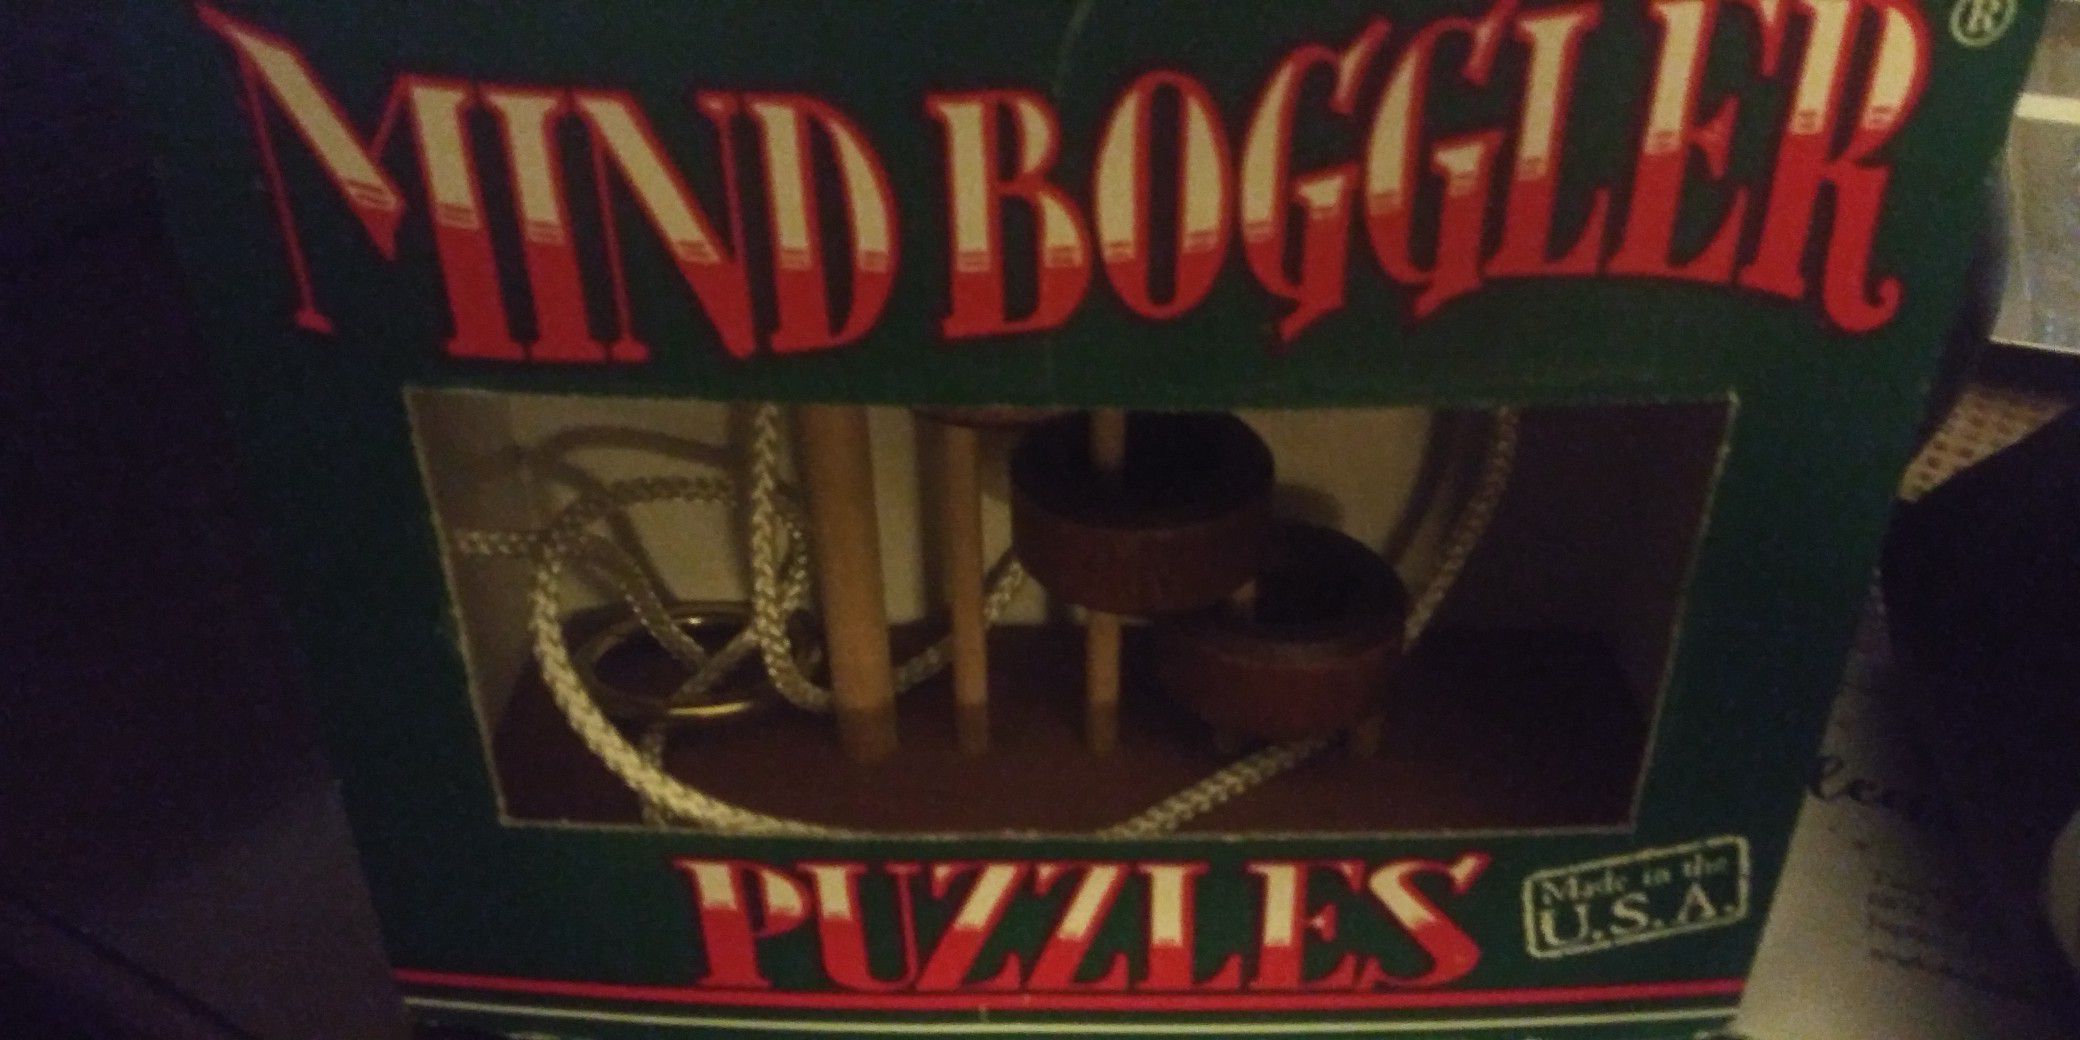 NEW IN BOX MIND BOGGLER WOOD PUZZLE GAME 5DOL FIRM LOTS DEALS MY POST GO LOOK